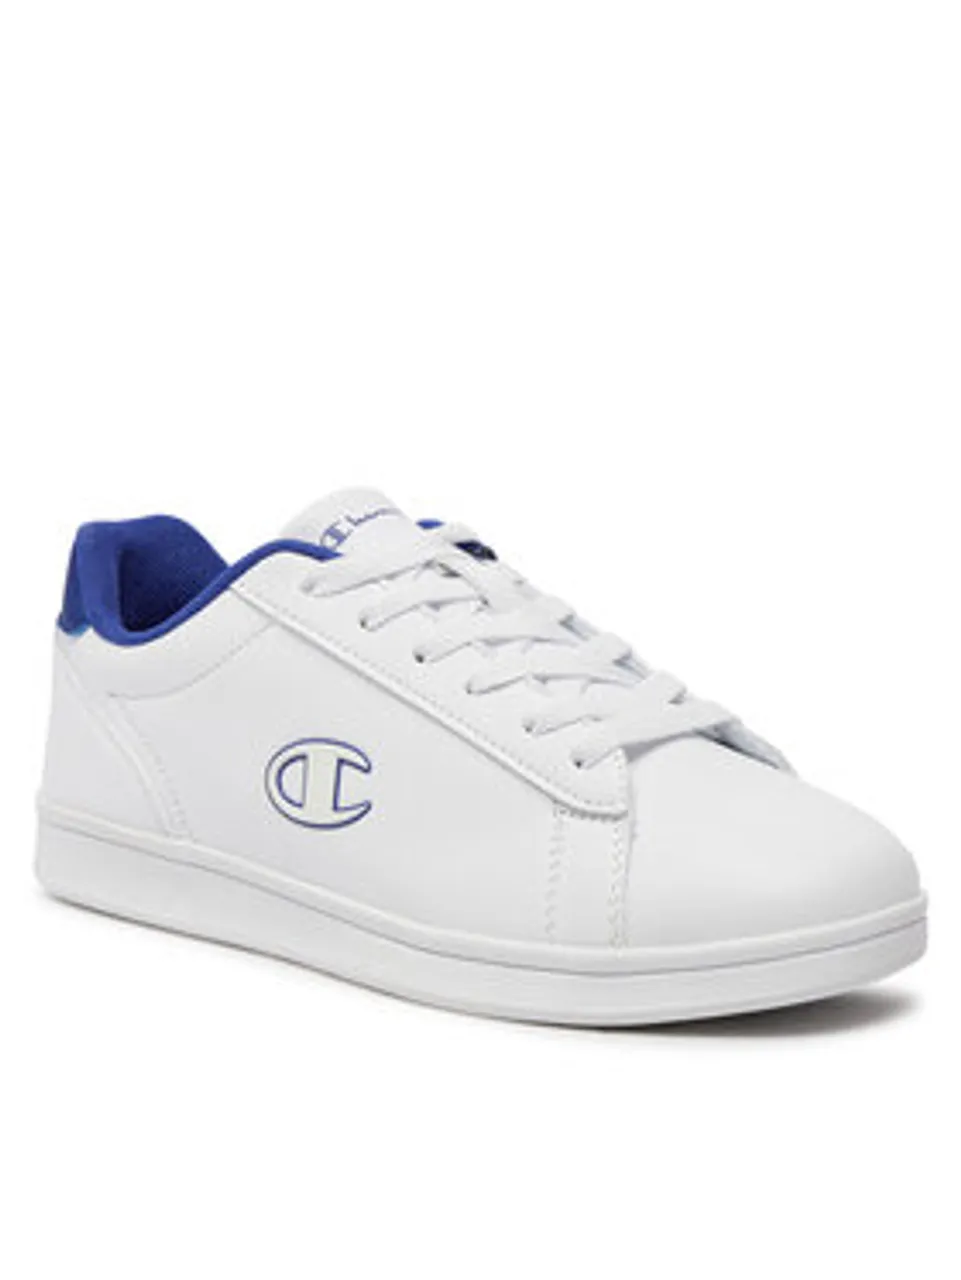 Champion Sneakers Centre Court B Gs Low Cut Shoe S32868-CHA-WW004 Weiß